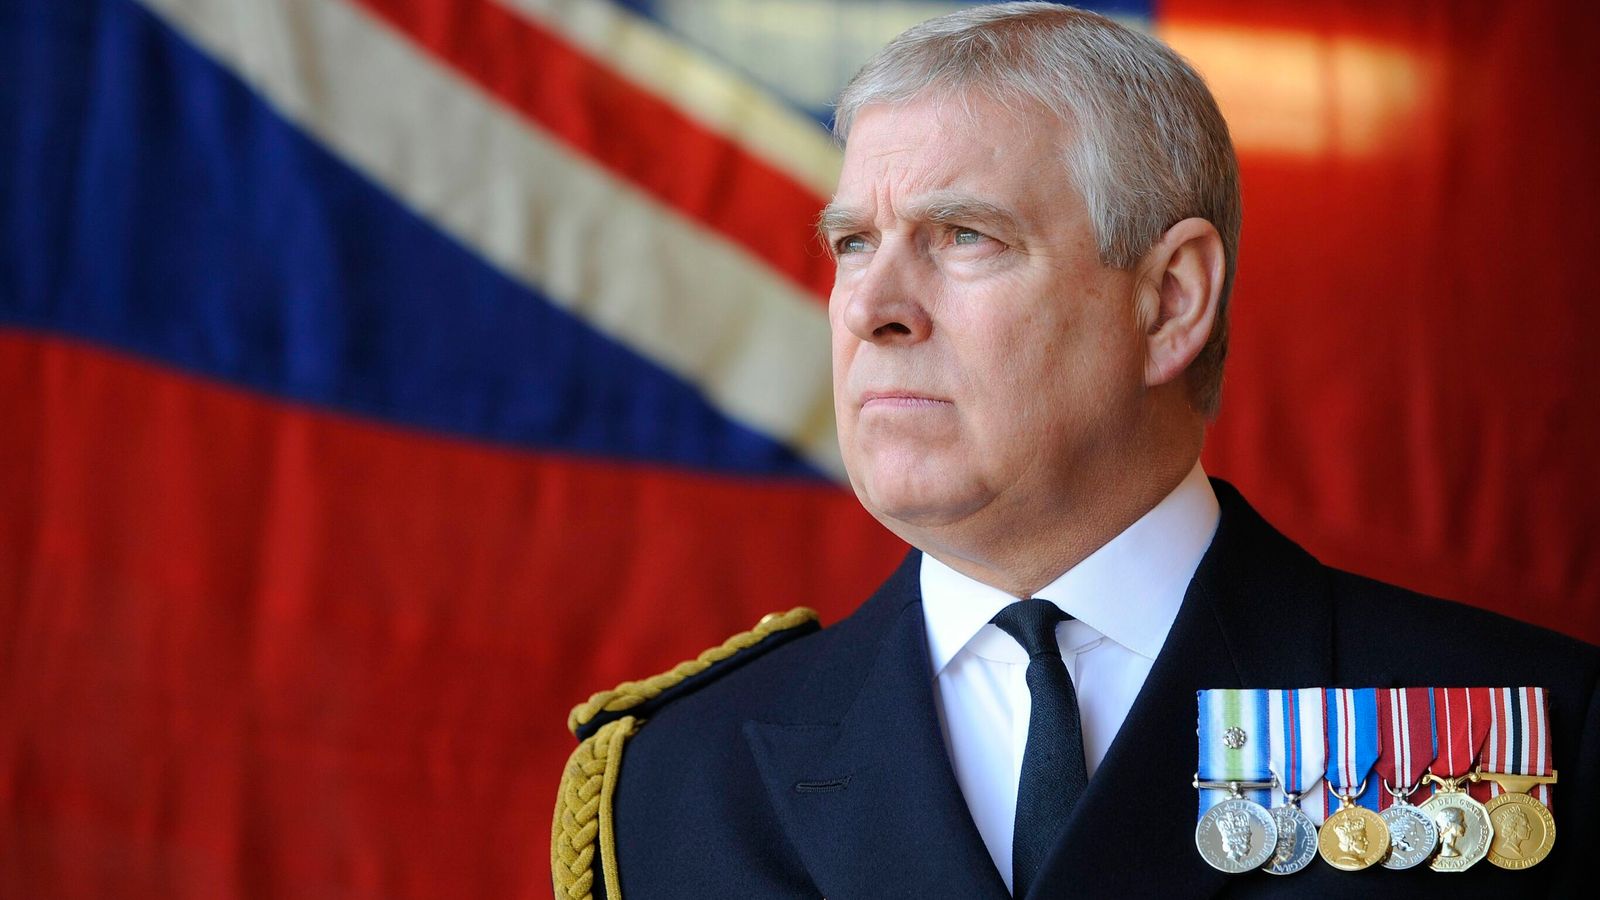 Queen Strips Prince Andrew Of All Military Titles, Royal Patronages Amid Sexual Abuse Lawsuit